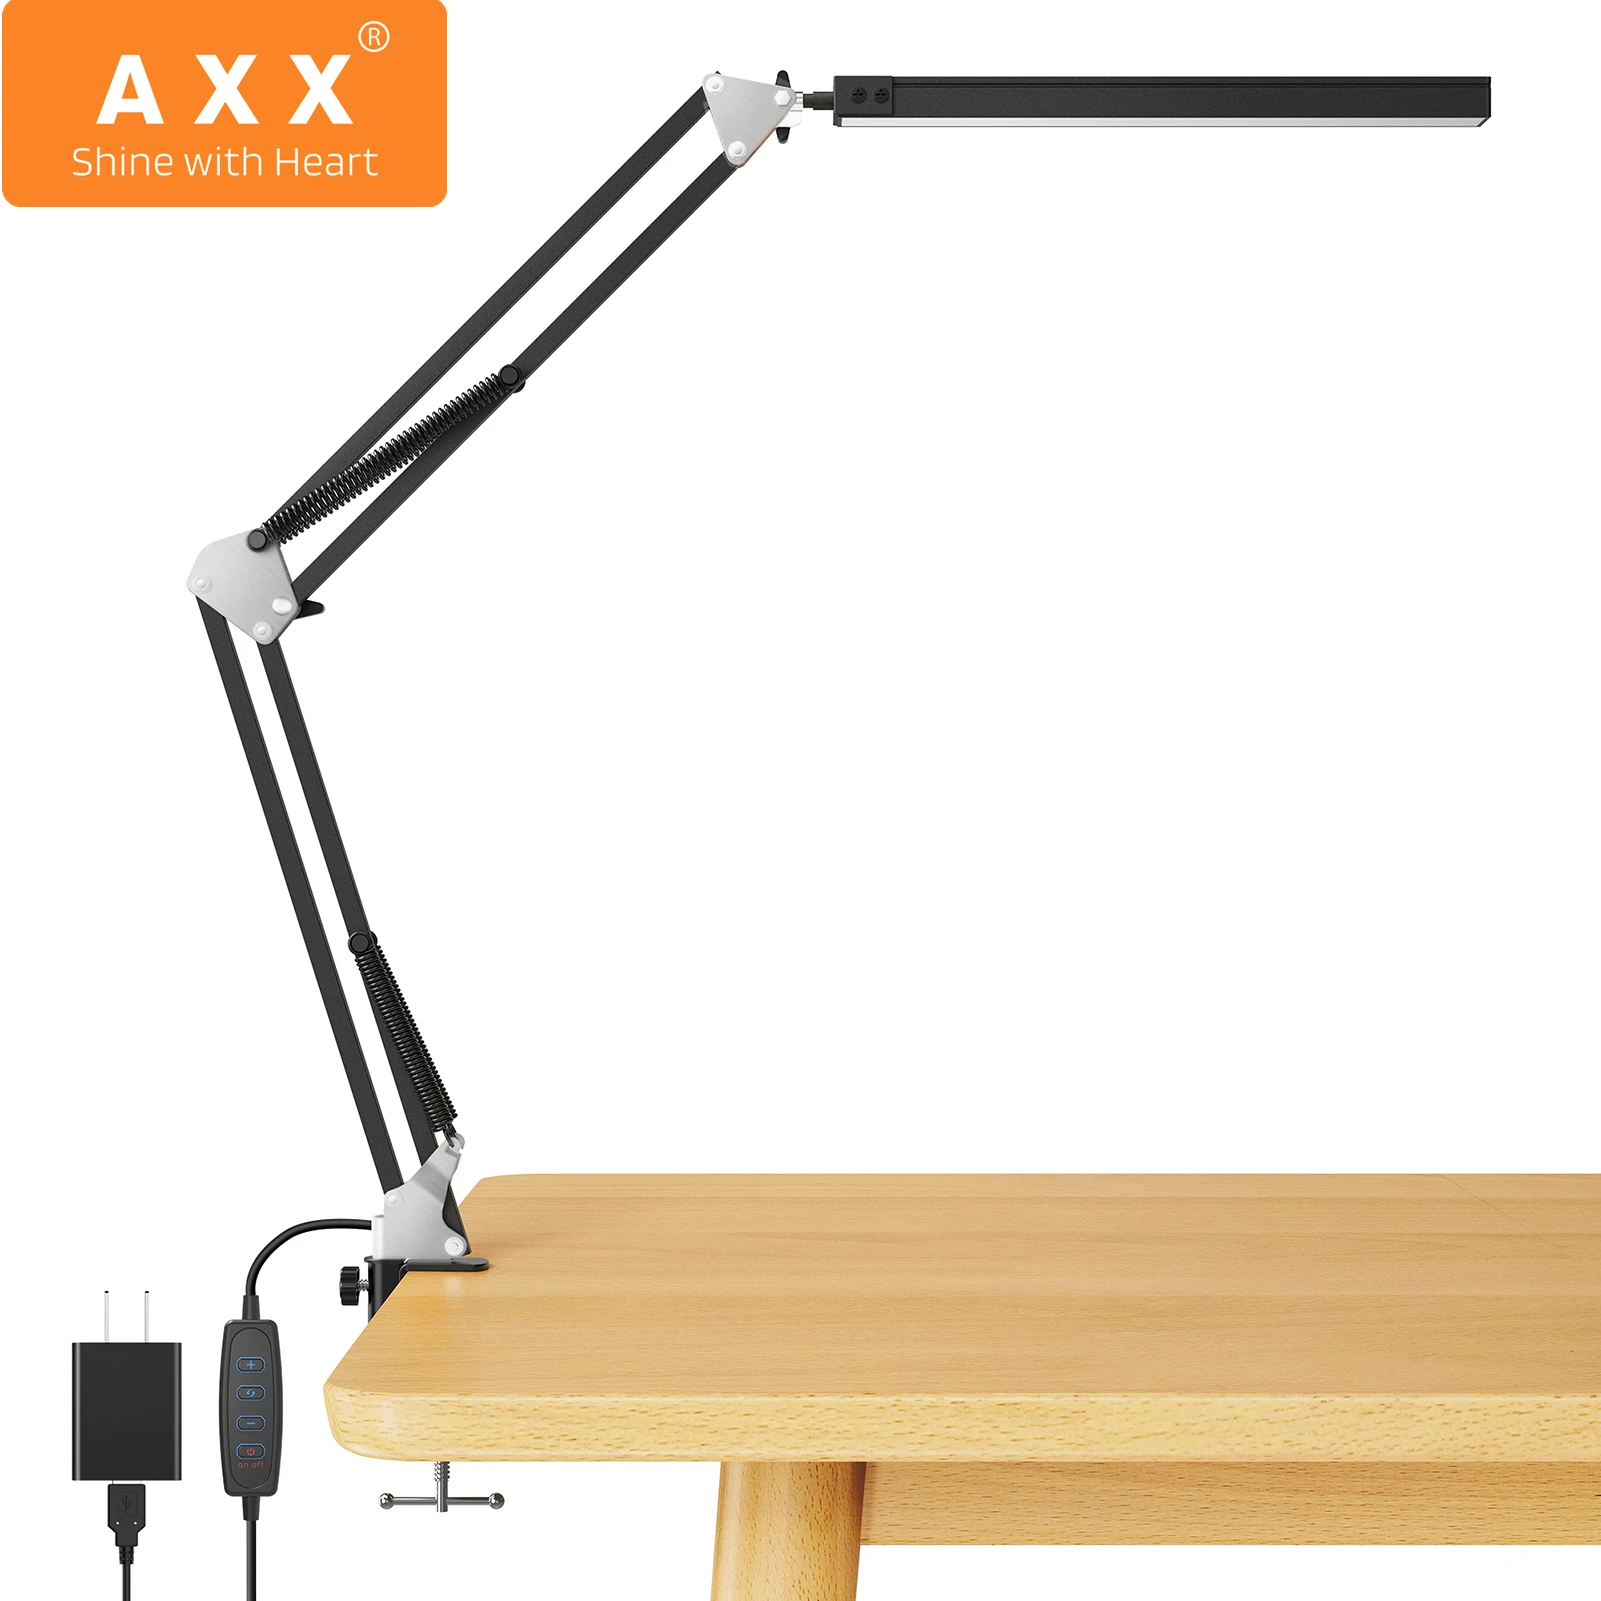 AXX USB Desk Lamps Dimmable Swing Arm Architect Lamp LED Desk Light for Home Office Living Room Bedroom Task Bedside Table Lamps